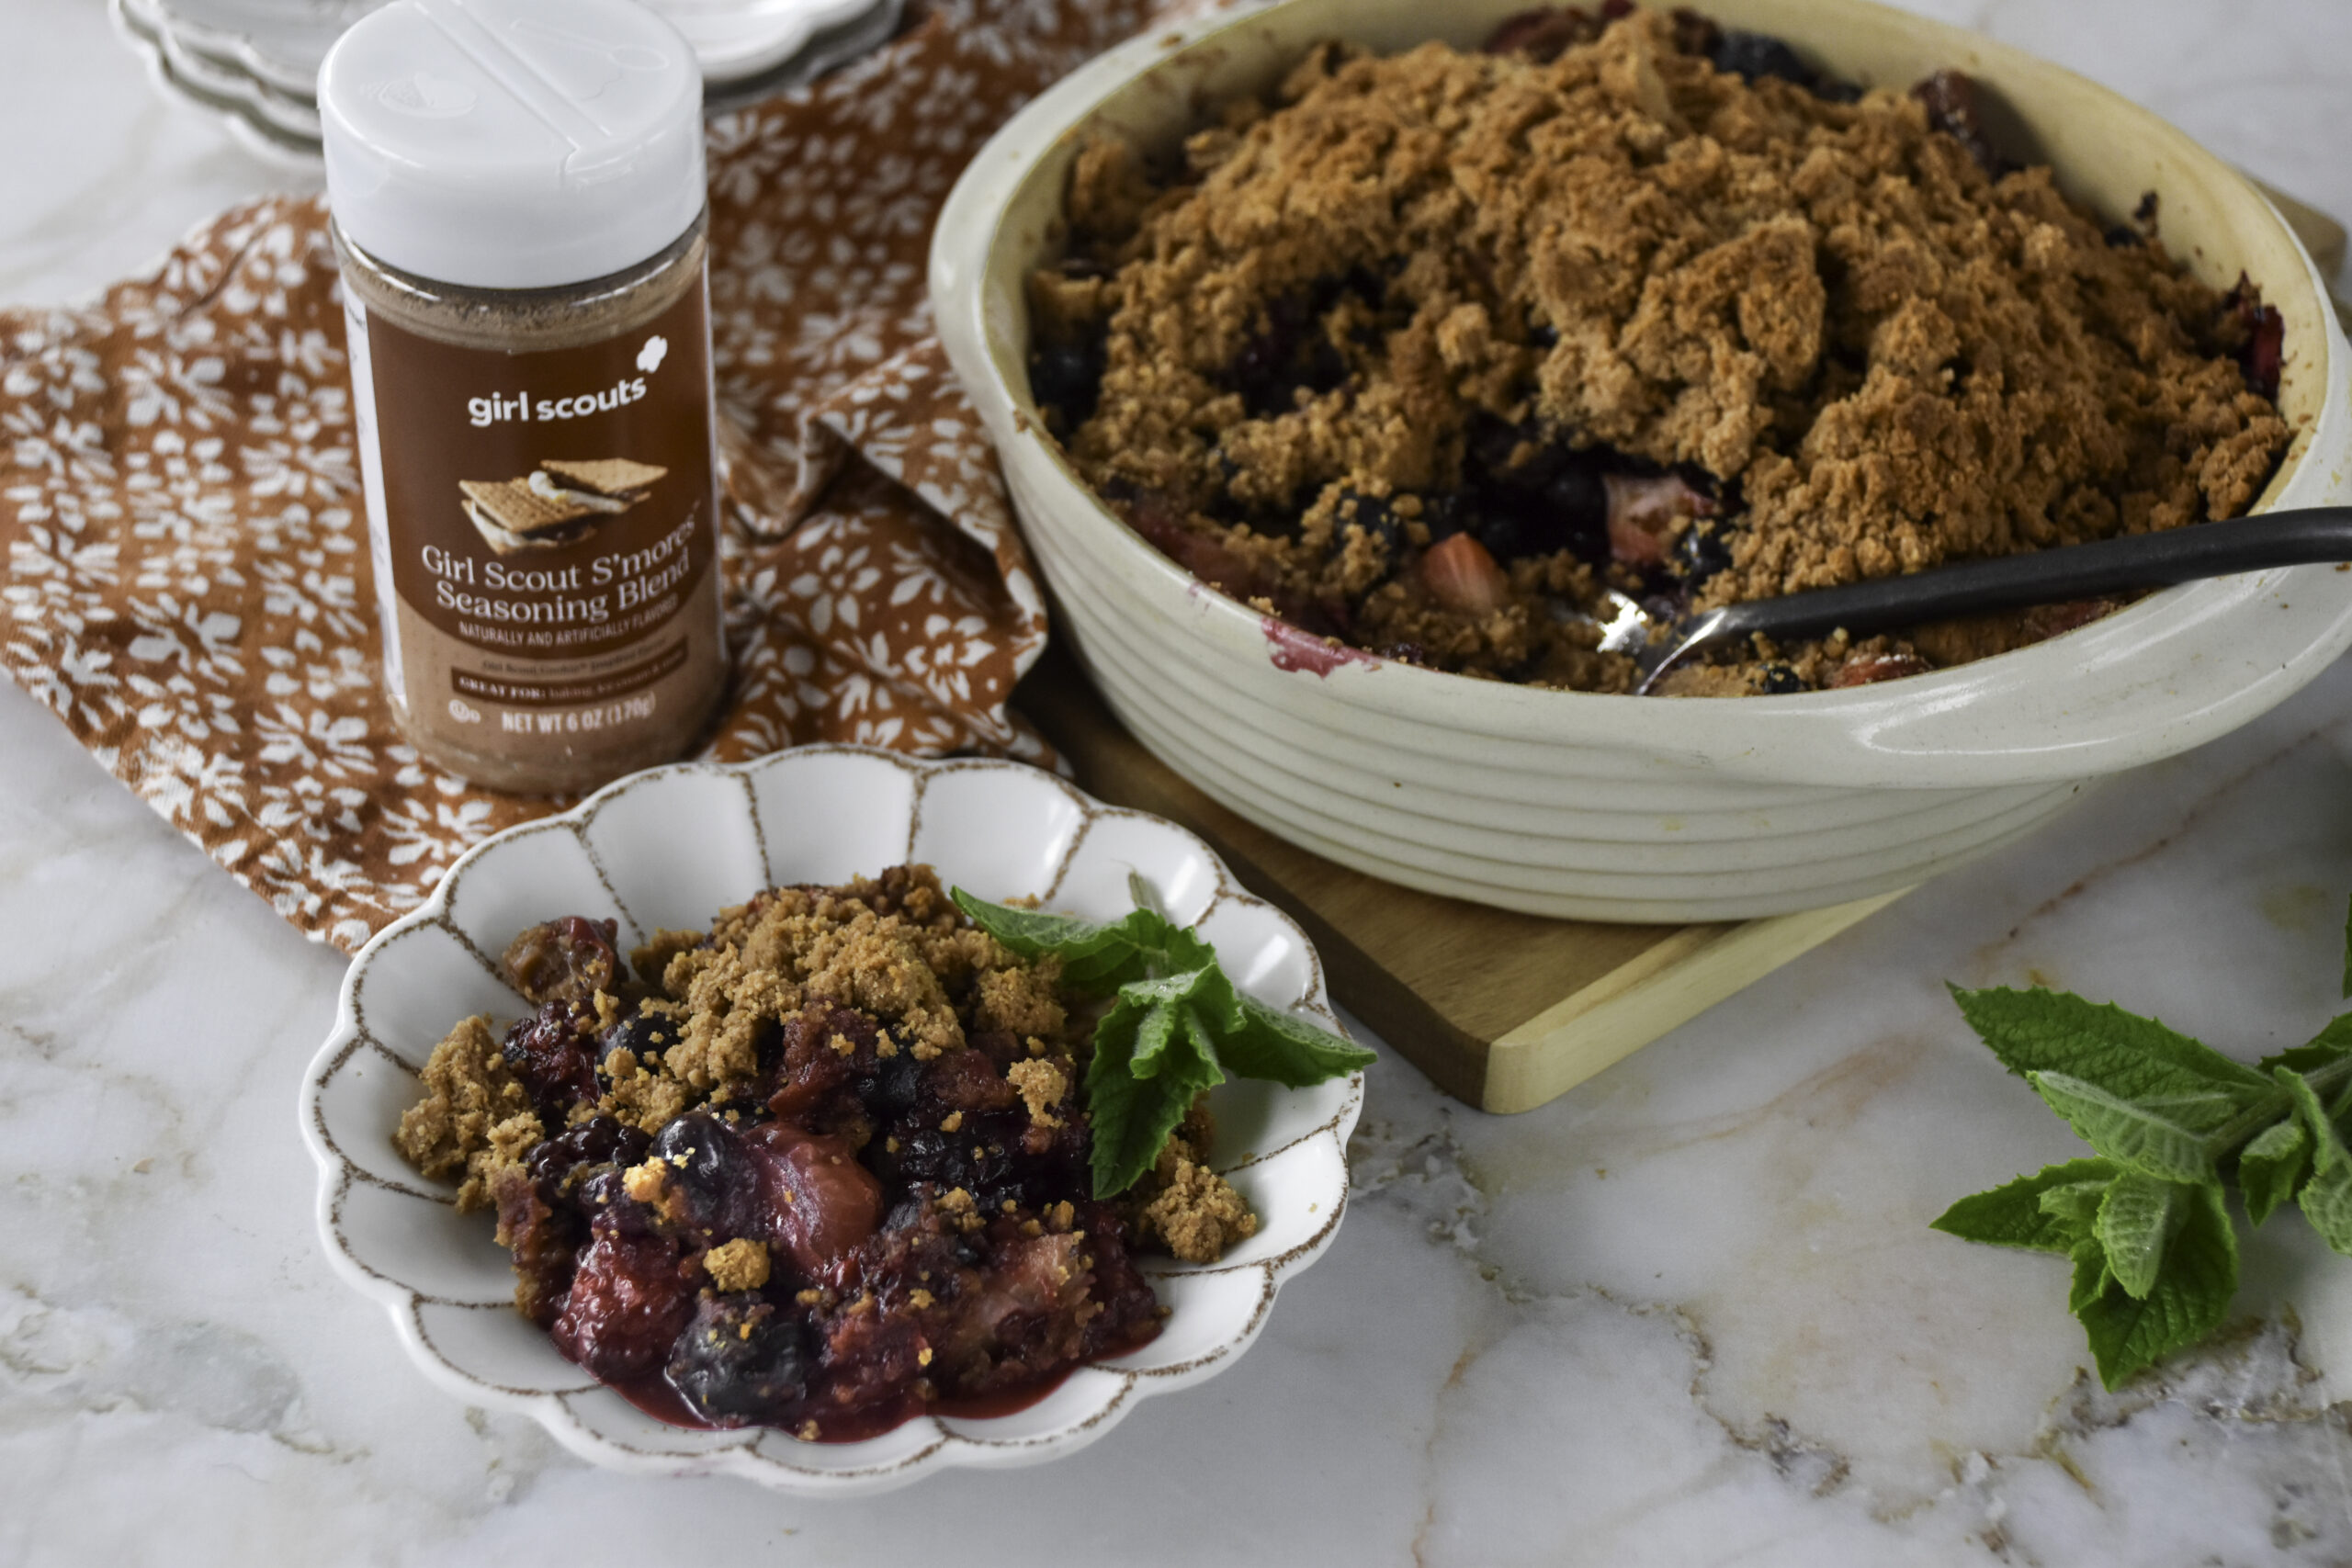 Girl Scout Smore’s™ Seasoning Blend Mixed Berry Crumble Recipe